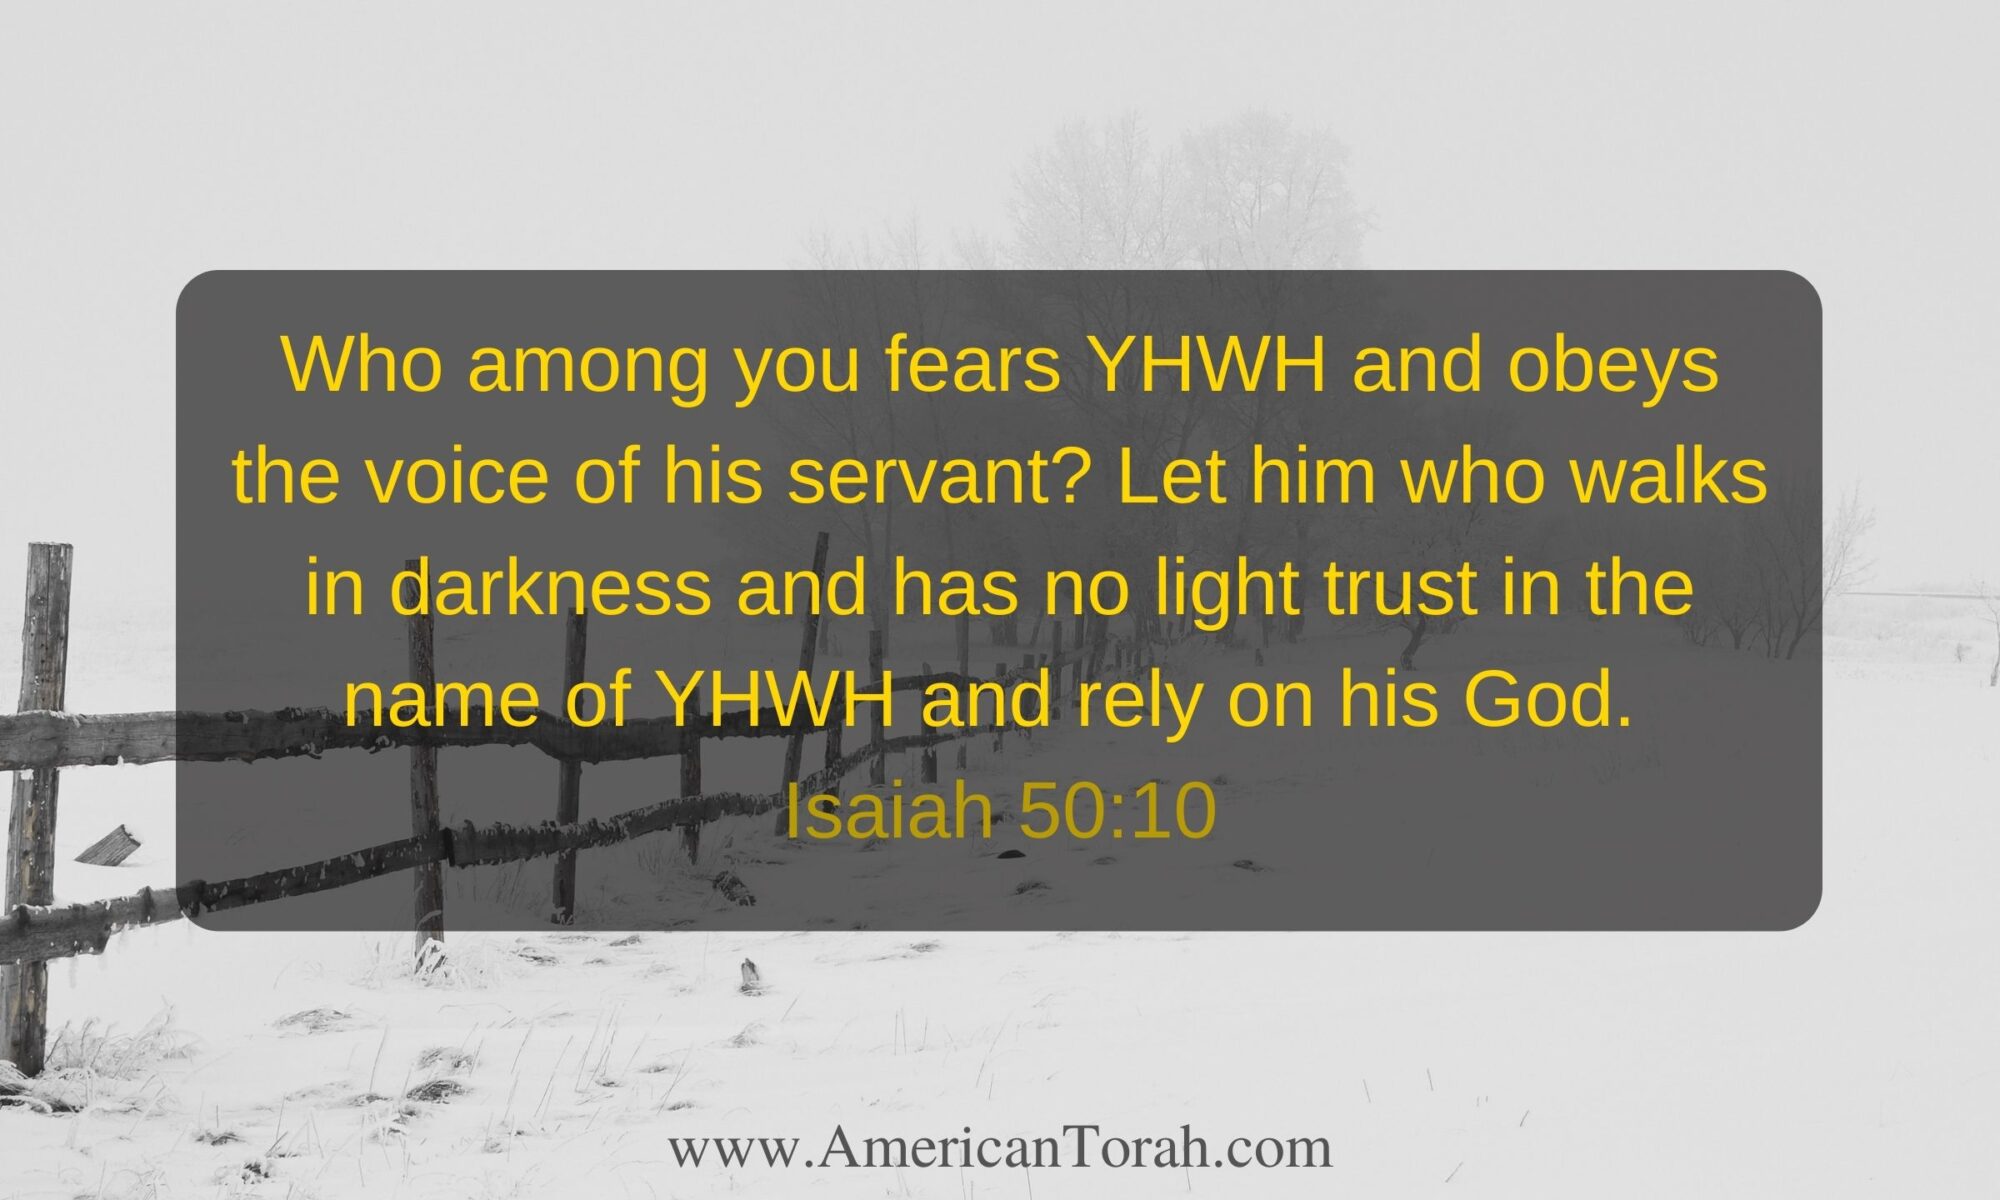 Who among you fears the LORD and obeys the voice of his servant? Let him who walks in darkness and has no light trust in the name of the LORD and rely on his God. Isaiah 50:10